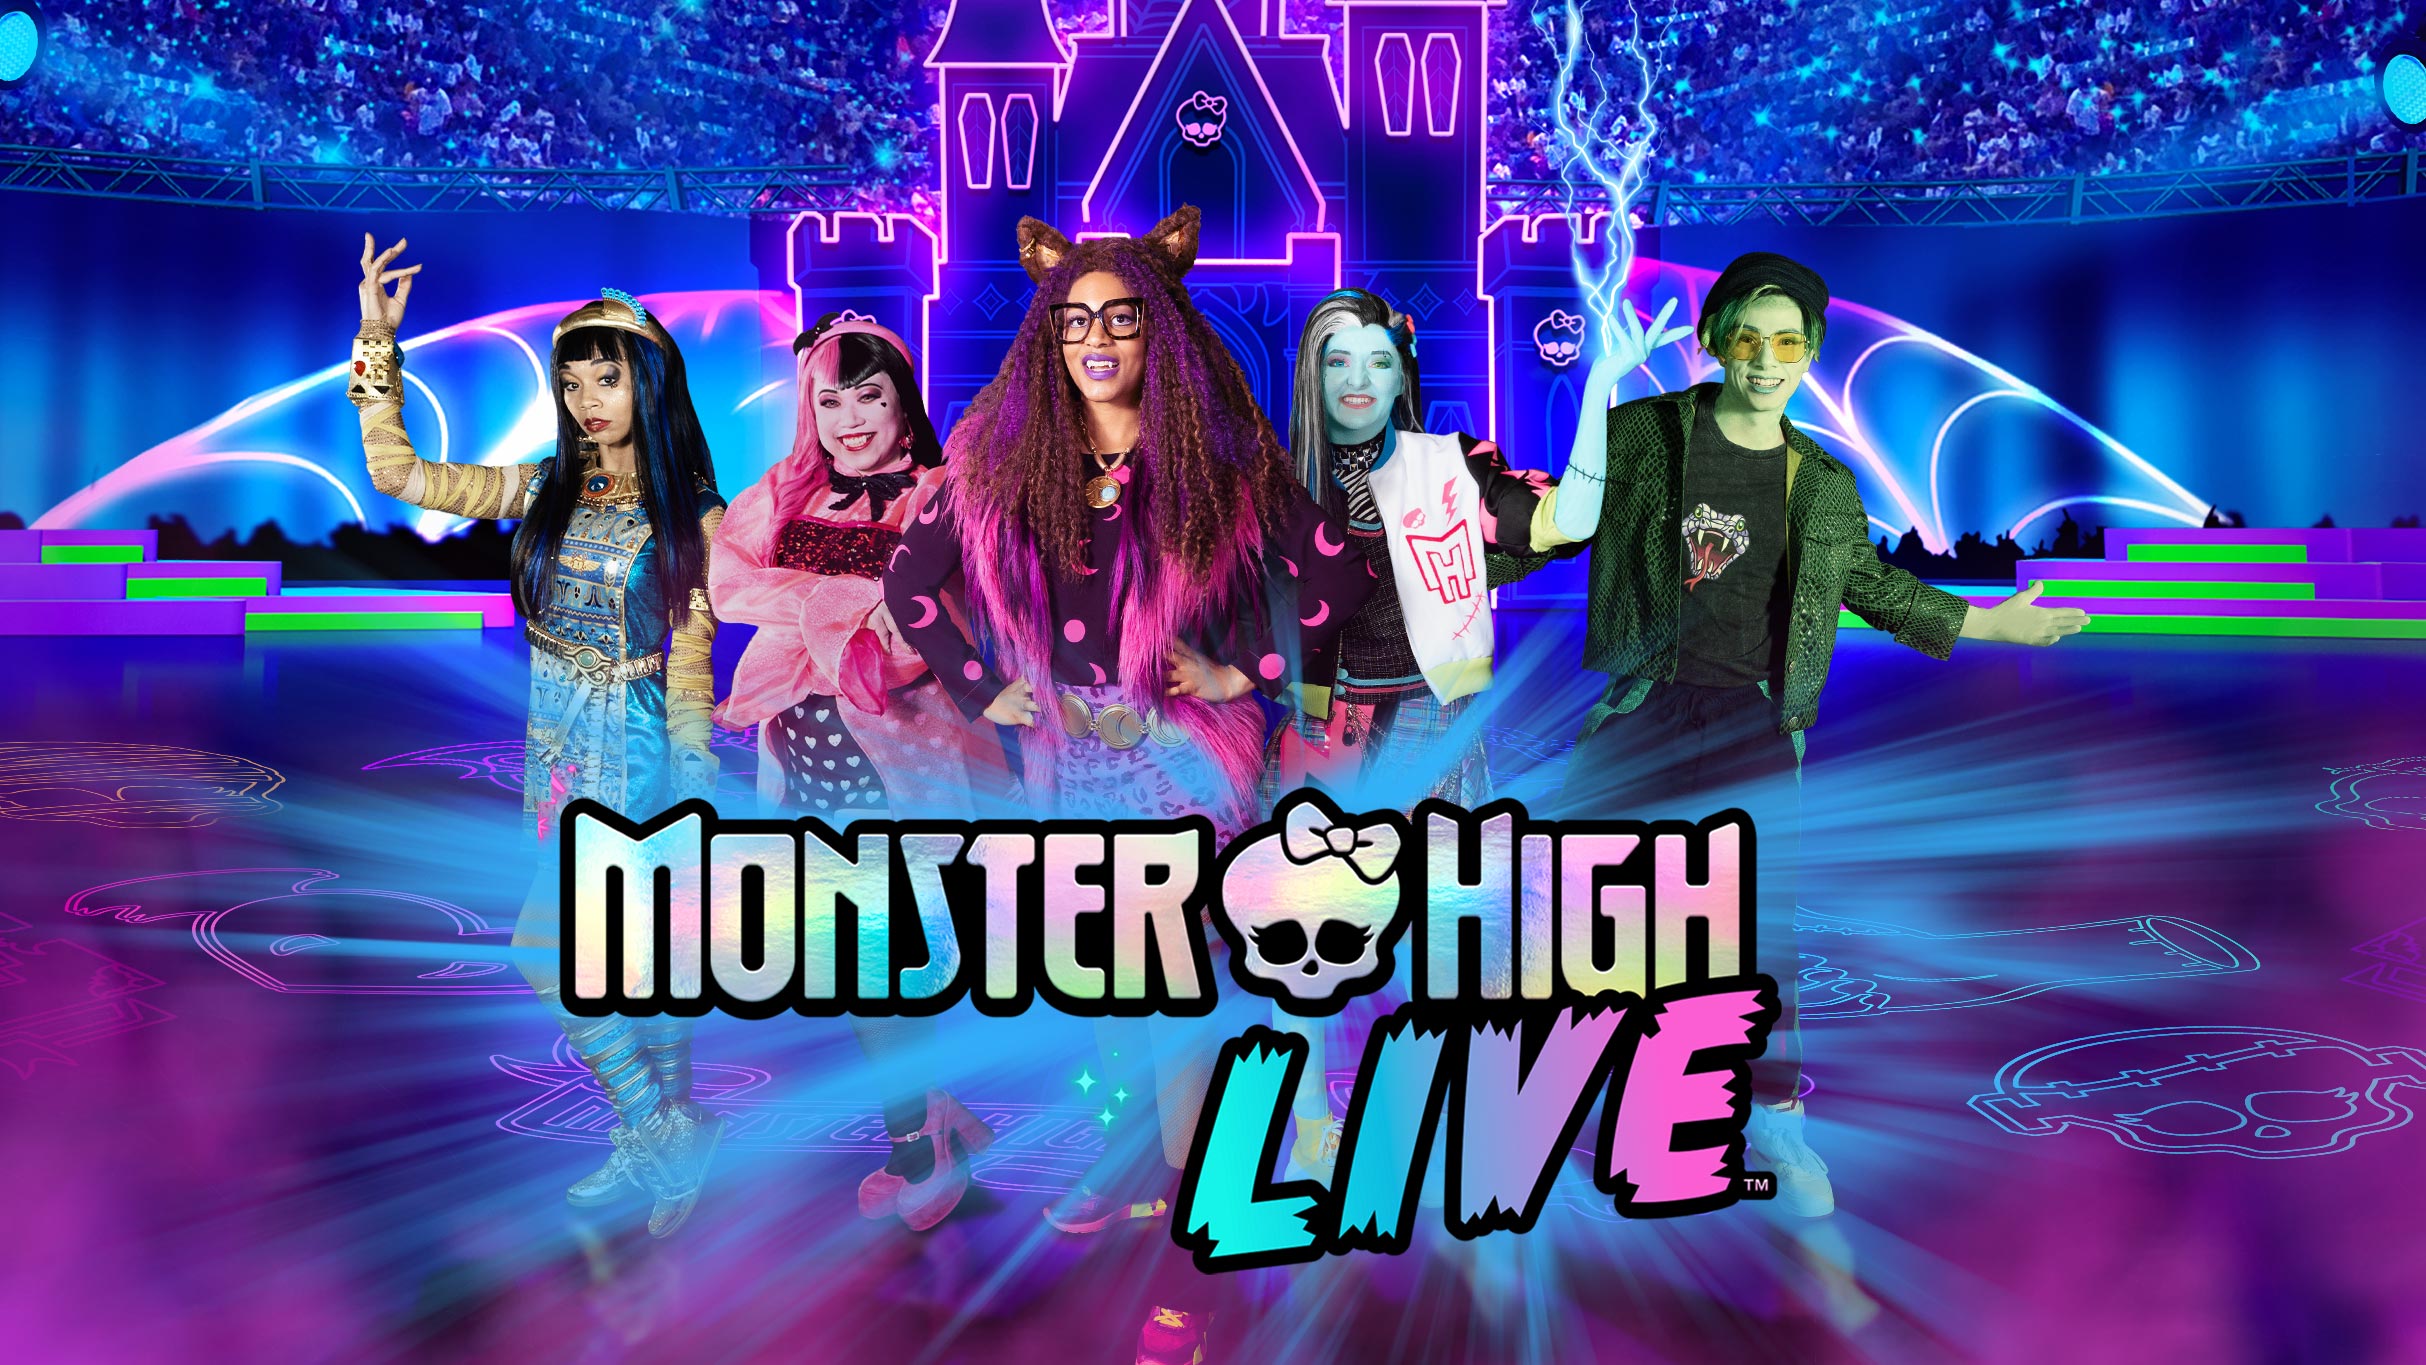 Monster High Live in Reading promo photo for Official Platinum presale offer code